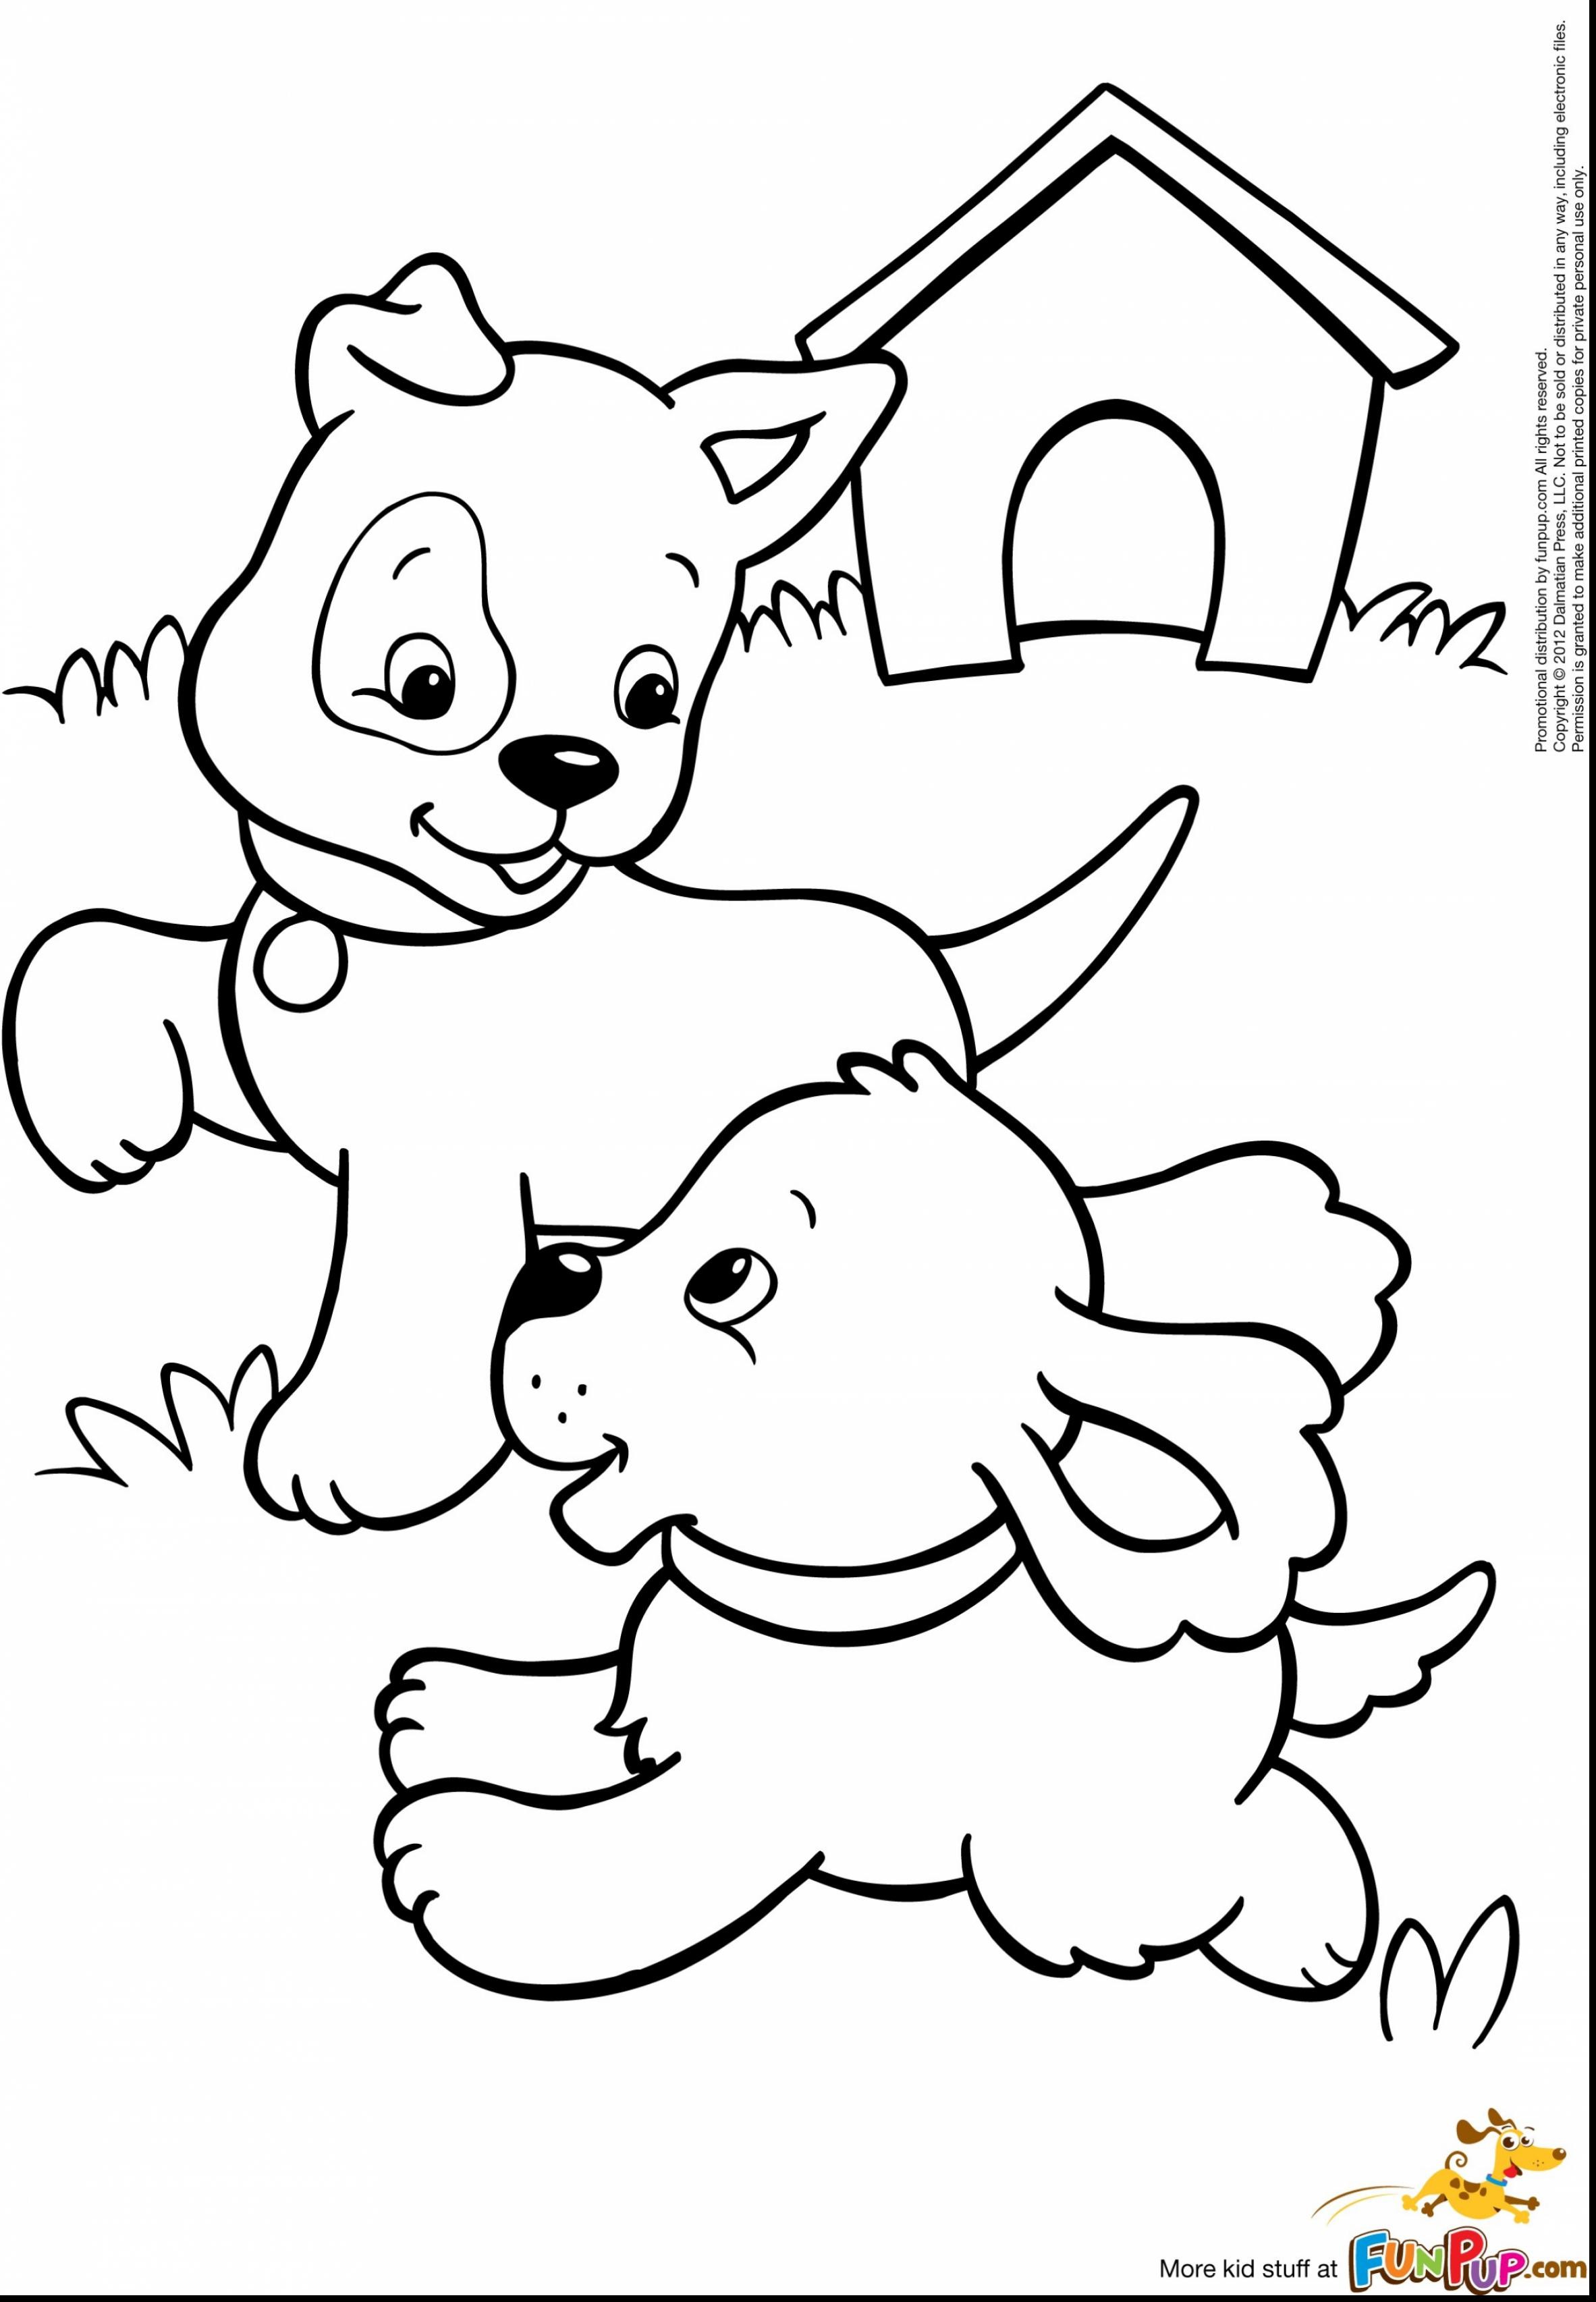 Coloring Pages Of Cute Puppies and Kittens - BubaKids.com